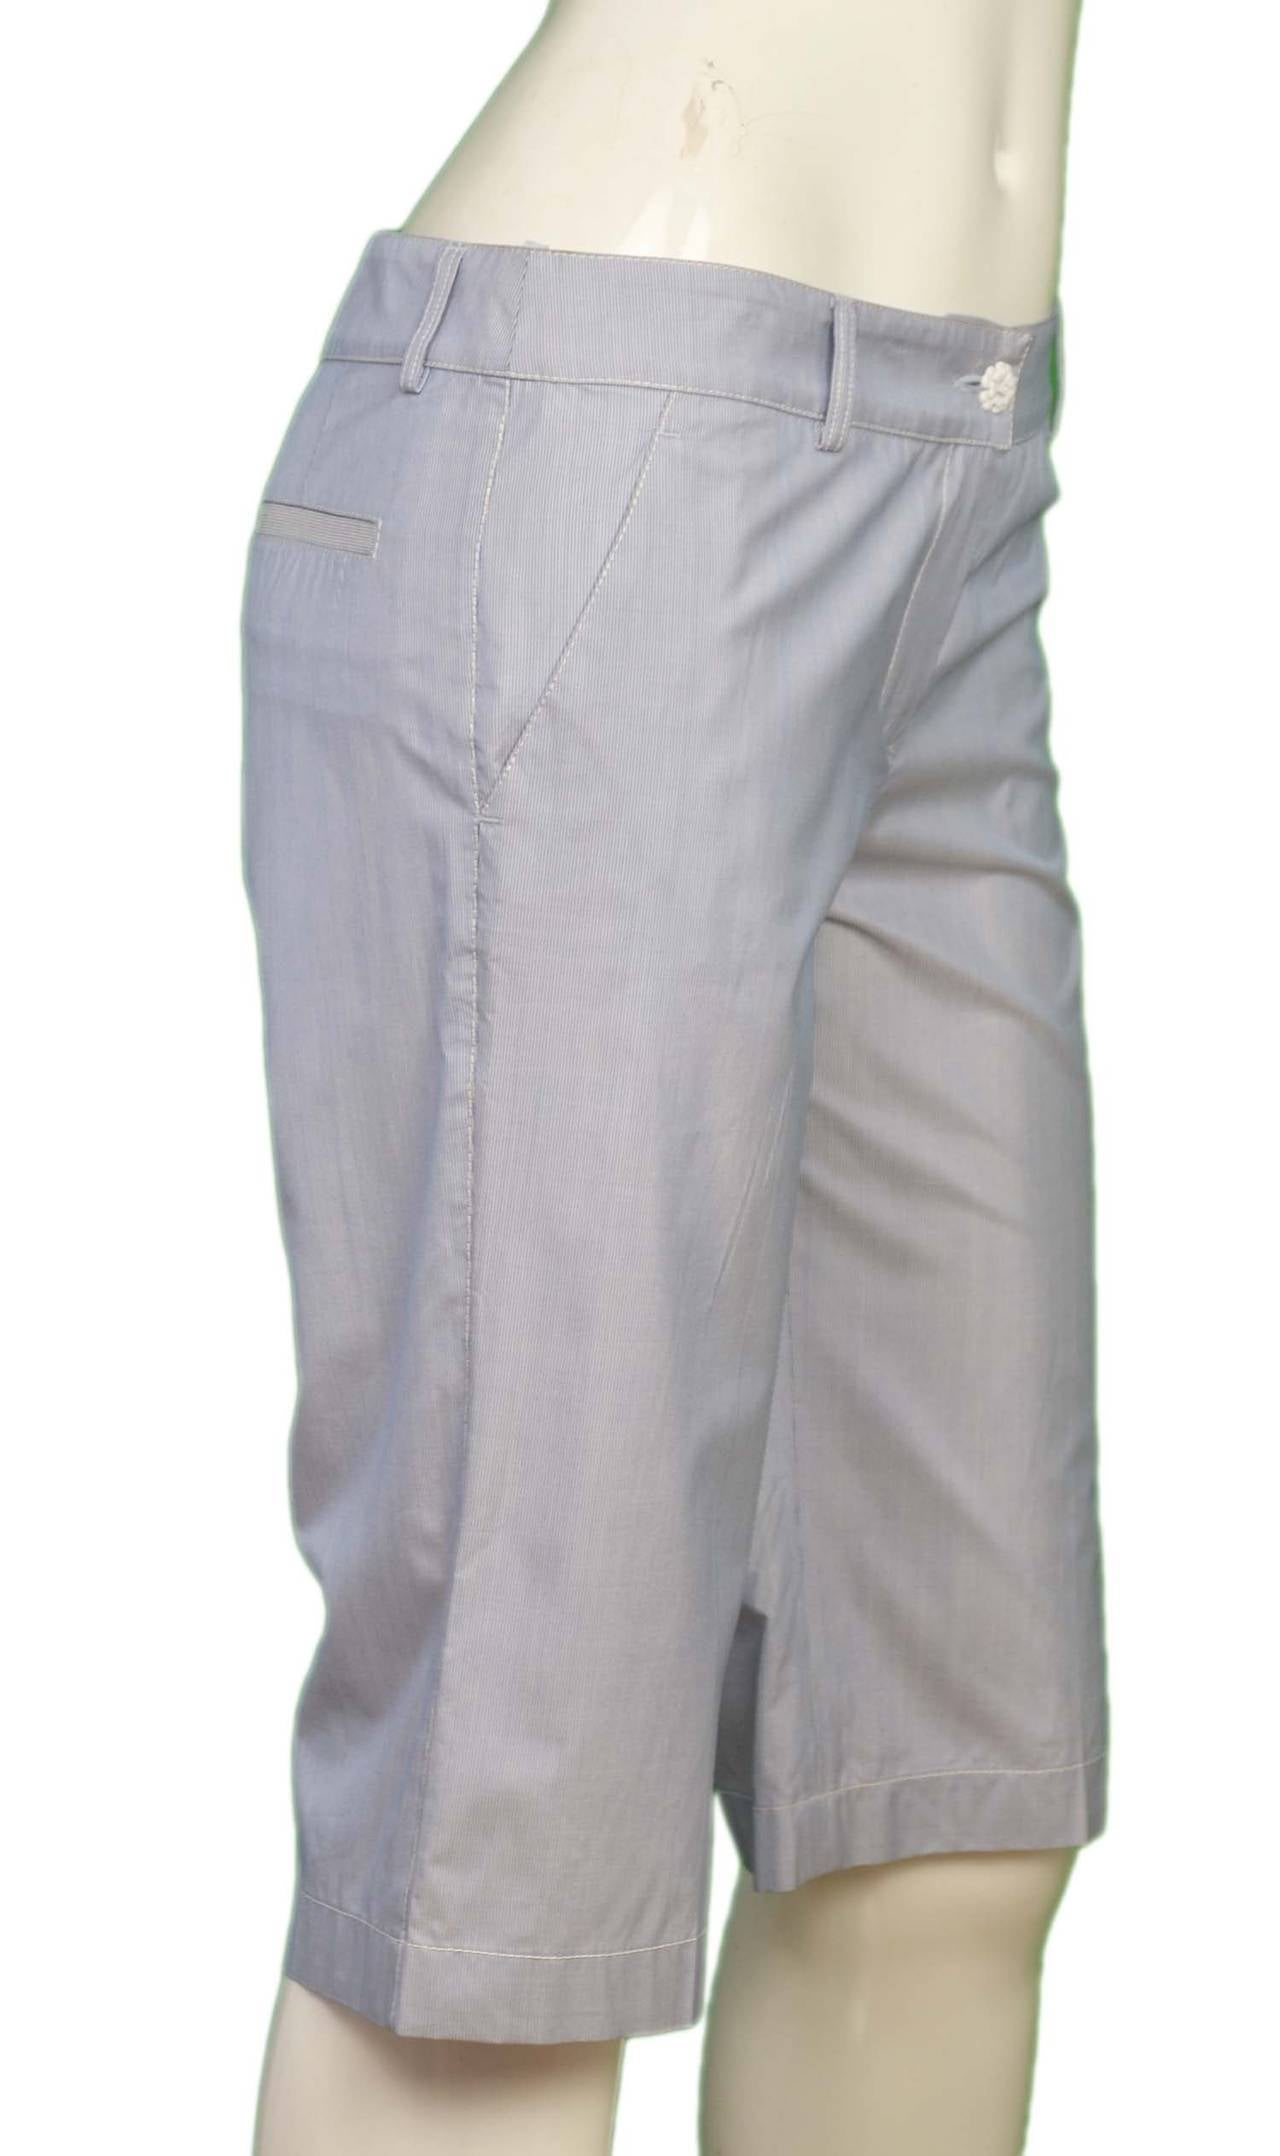 CHANEL Pinstripe Long Shorts sz. 38
Made in: Italy
Year of Production: 2005
Color: Blue and white
Composition: 100% Silk
Lining: 100% Silk
Closure/opening: Zipper with button
Exterior Pockets: Two back pockets and one pocket at each